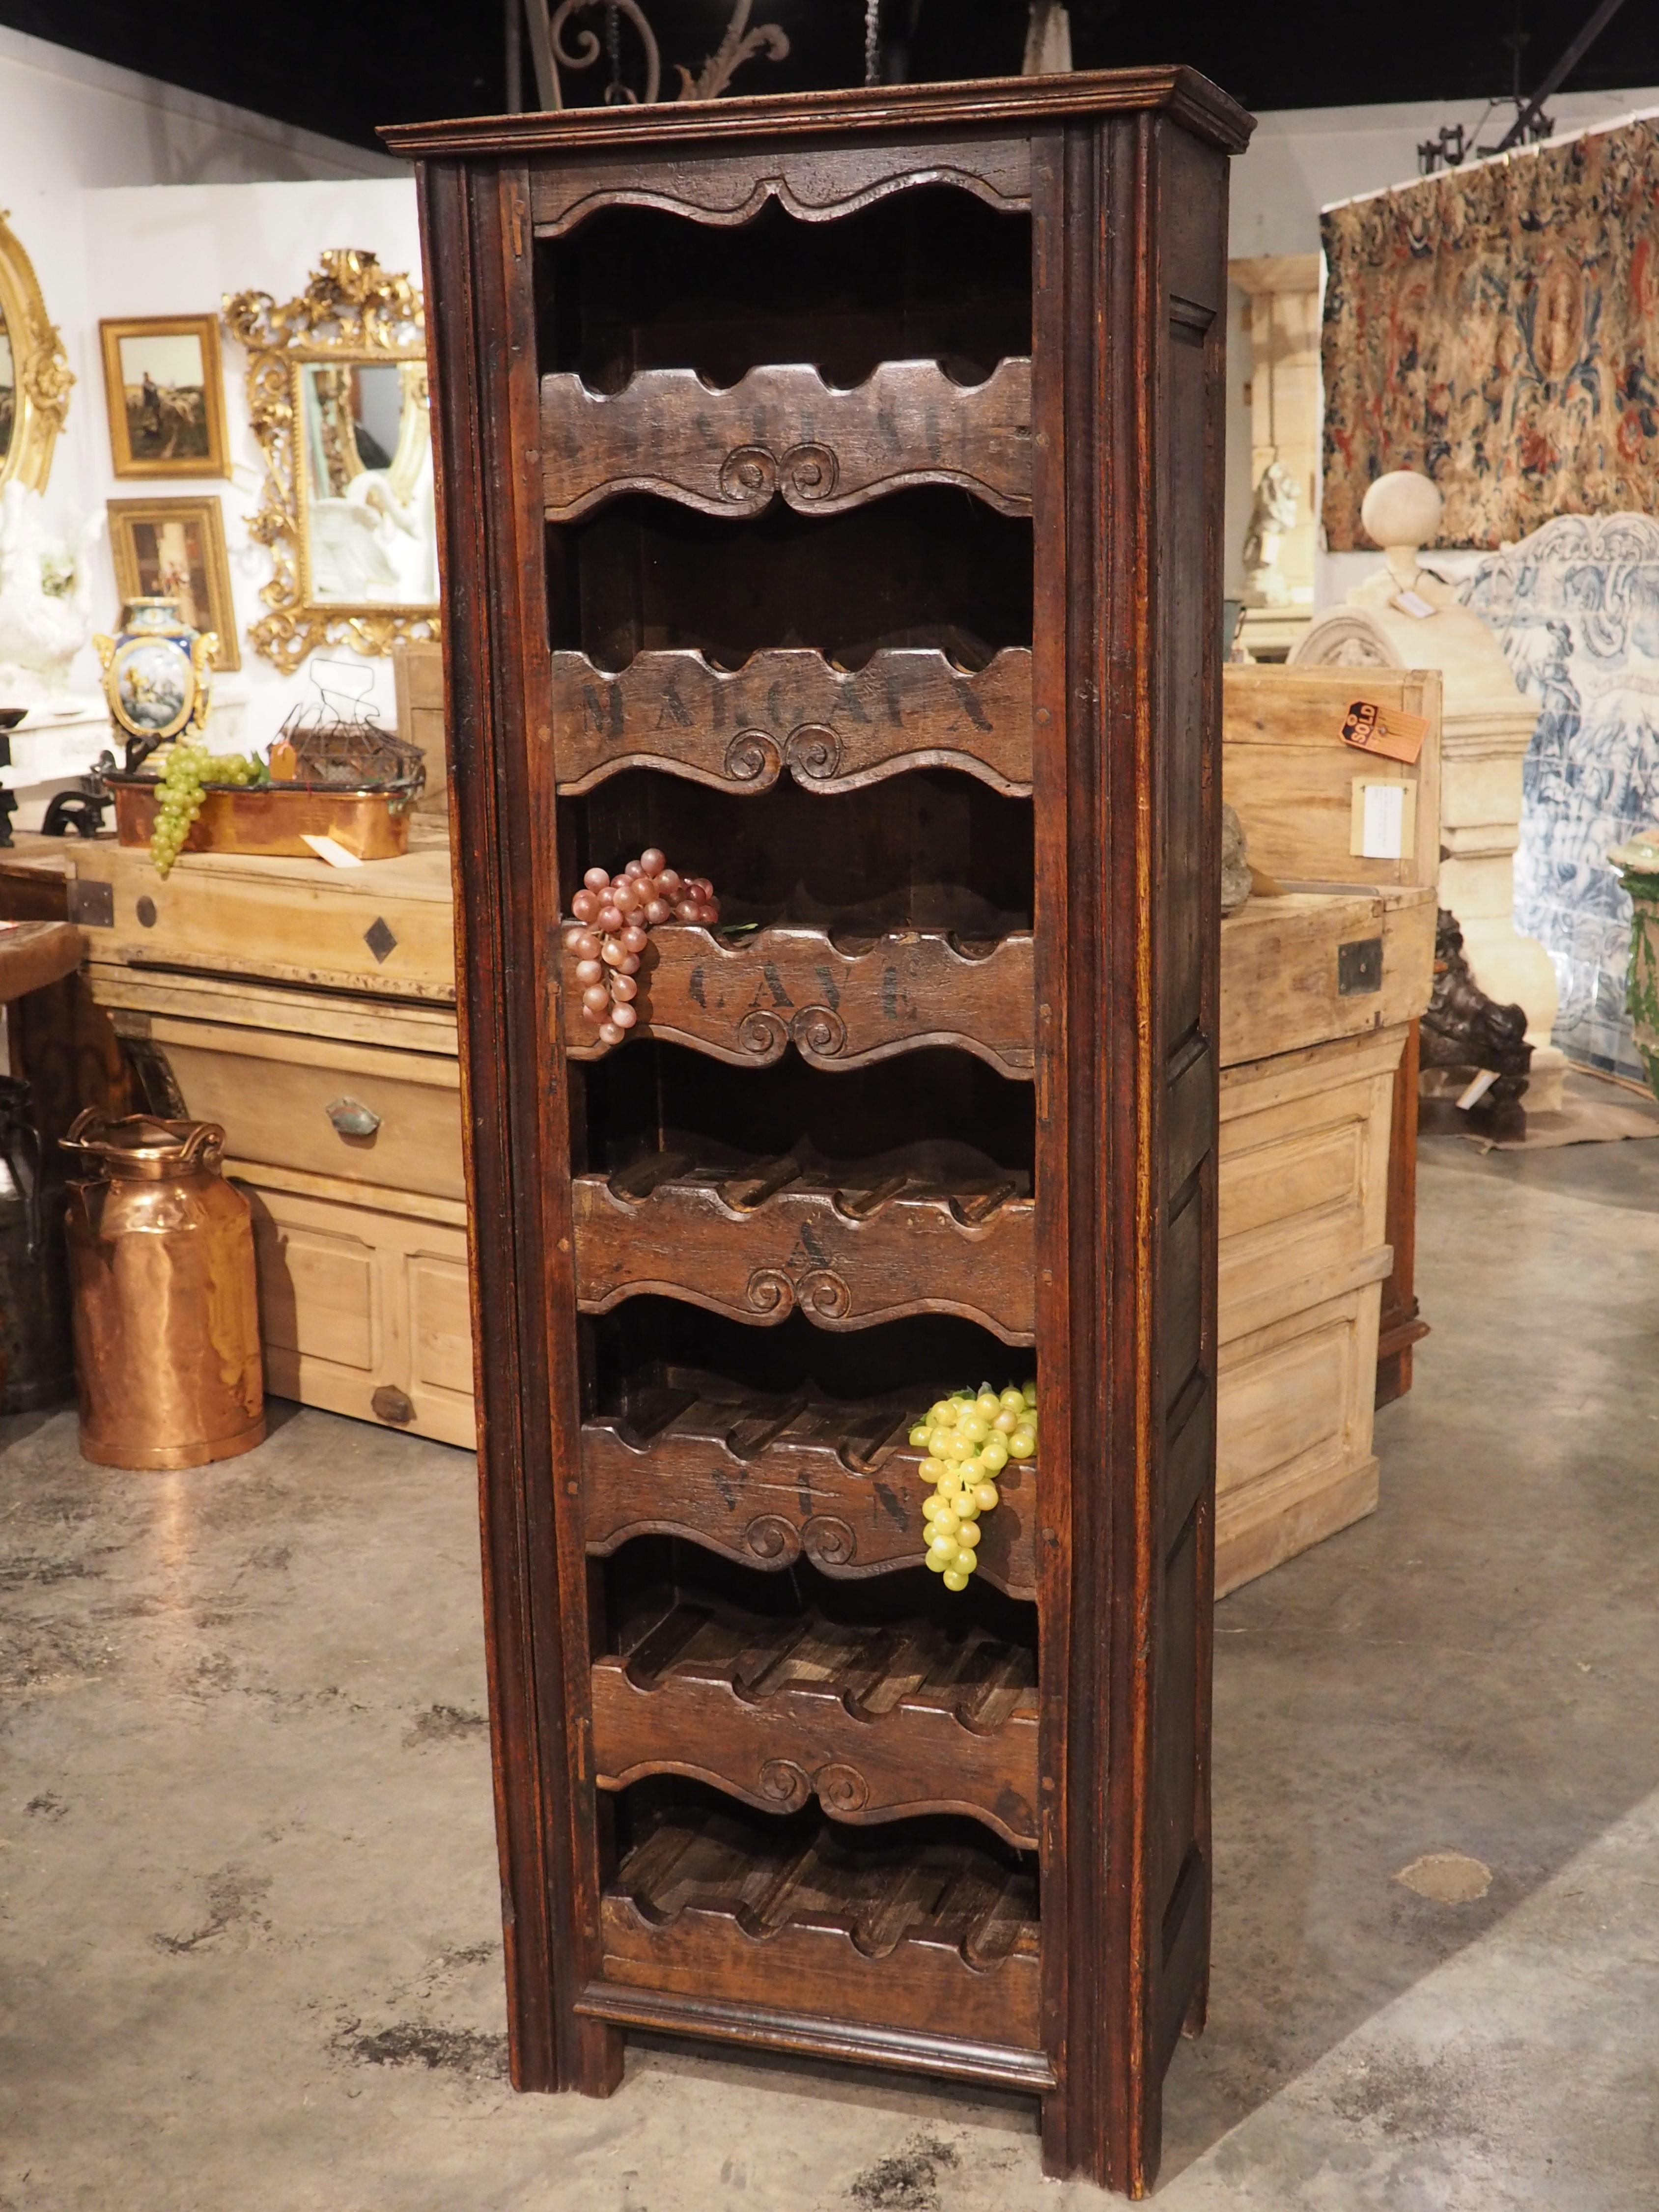 A towering cave a vin wine bottle carrier from France, sections of the wood were repurposed from 19th century furniture, most likely a chiffonier or country clock case. The piece has been made with a total of seven wine racks each with a four bottle